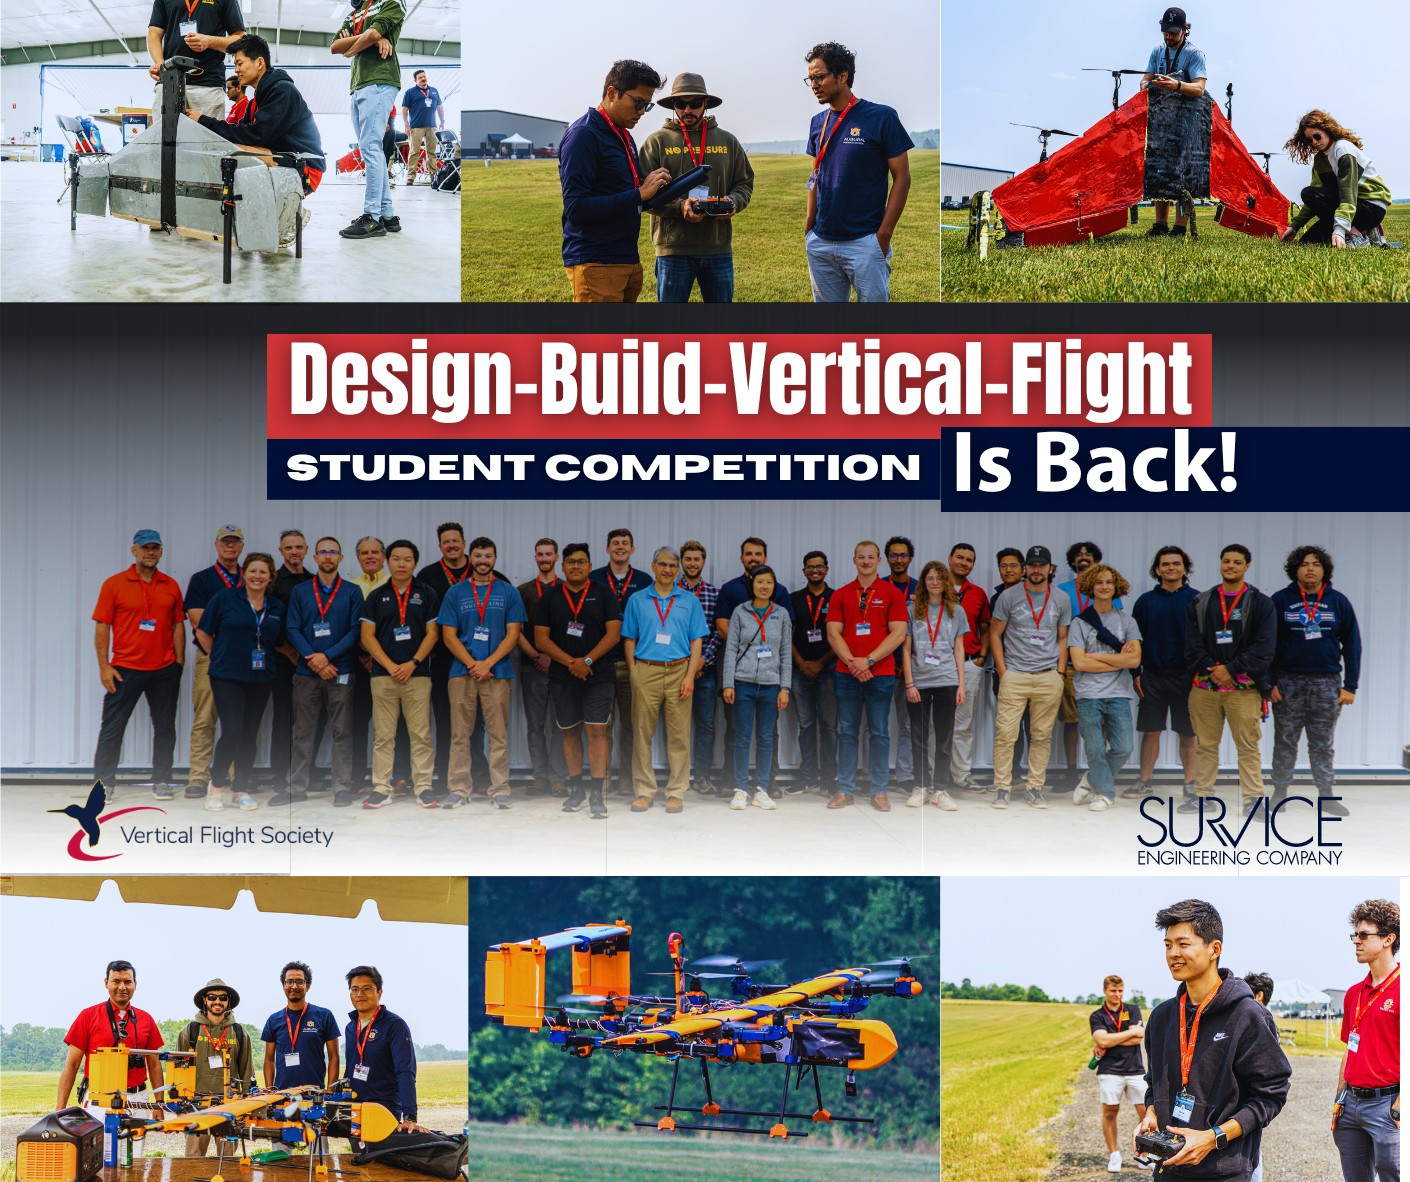 The Design-Build-Vertical-Flight Student Competition is back!